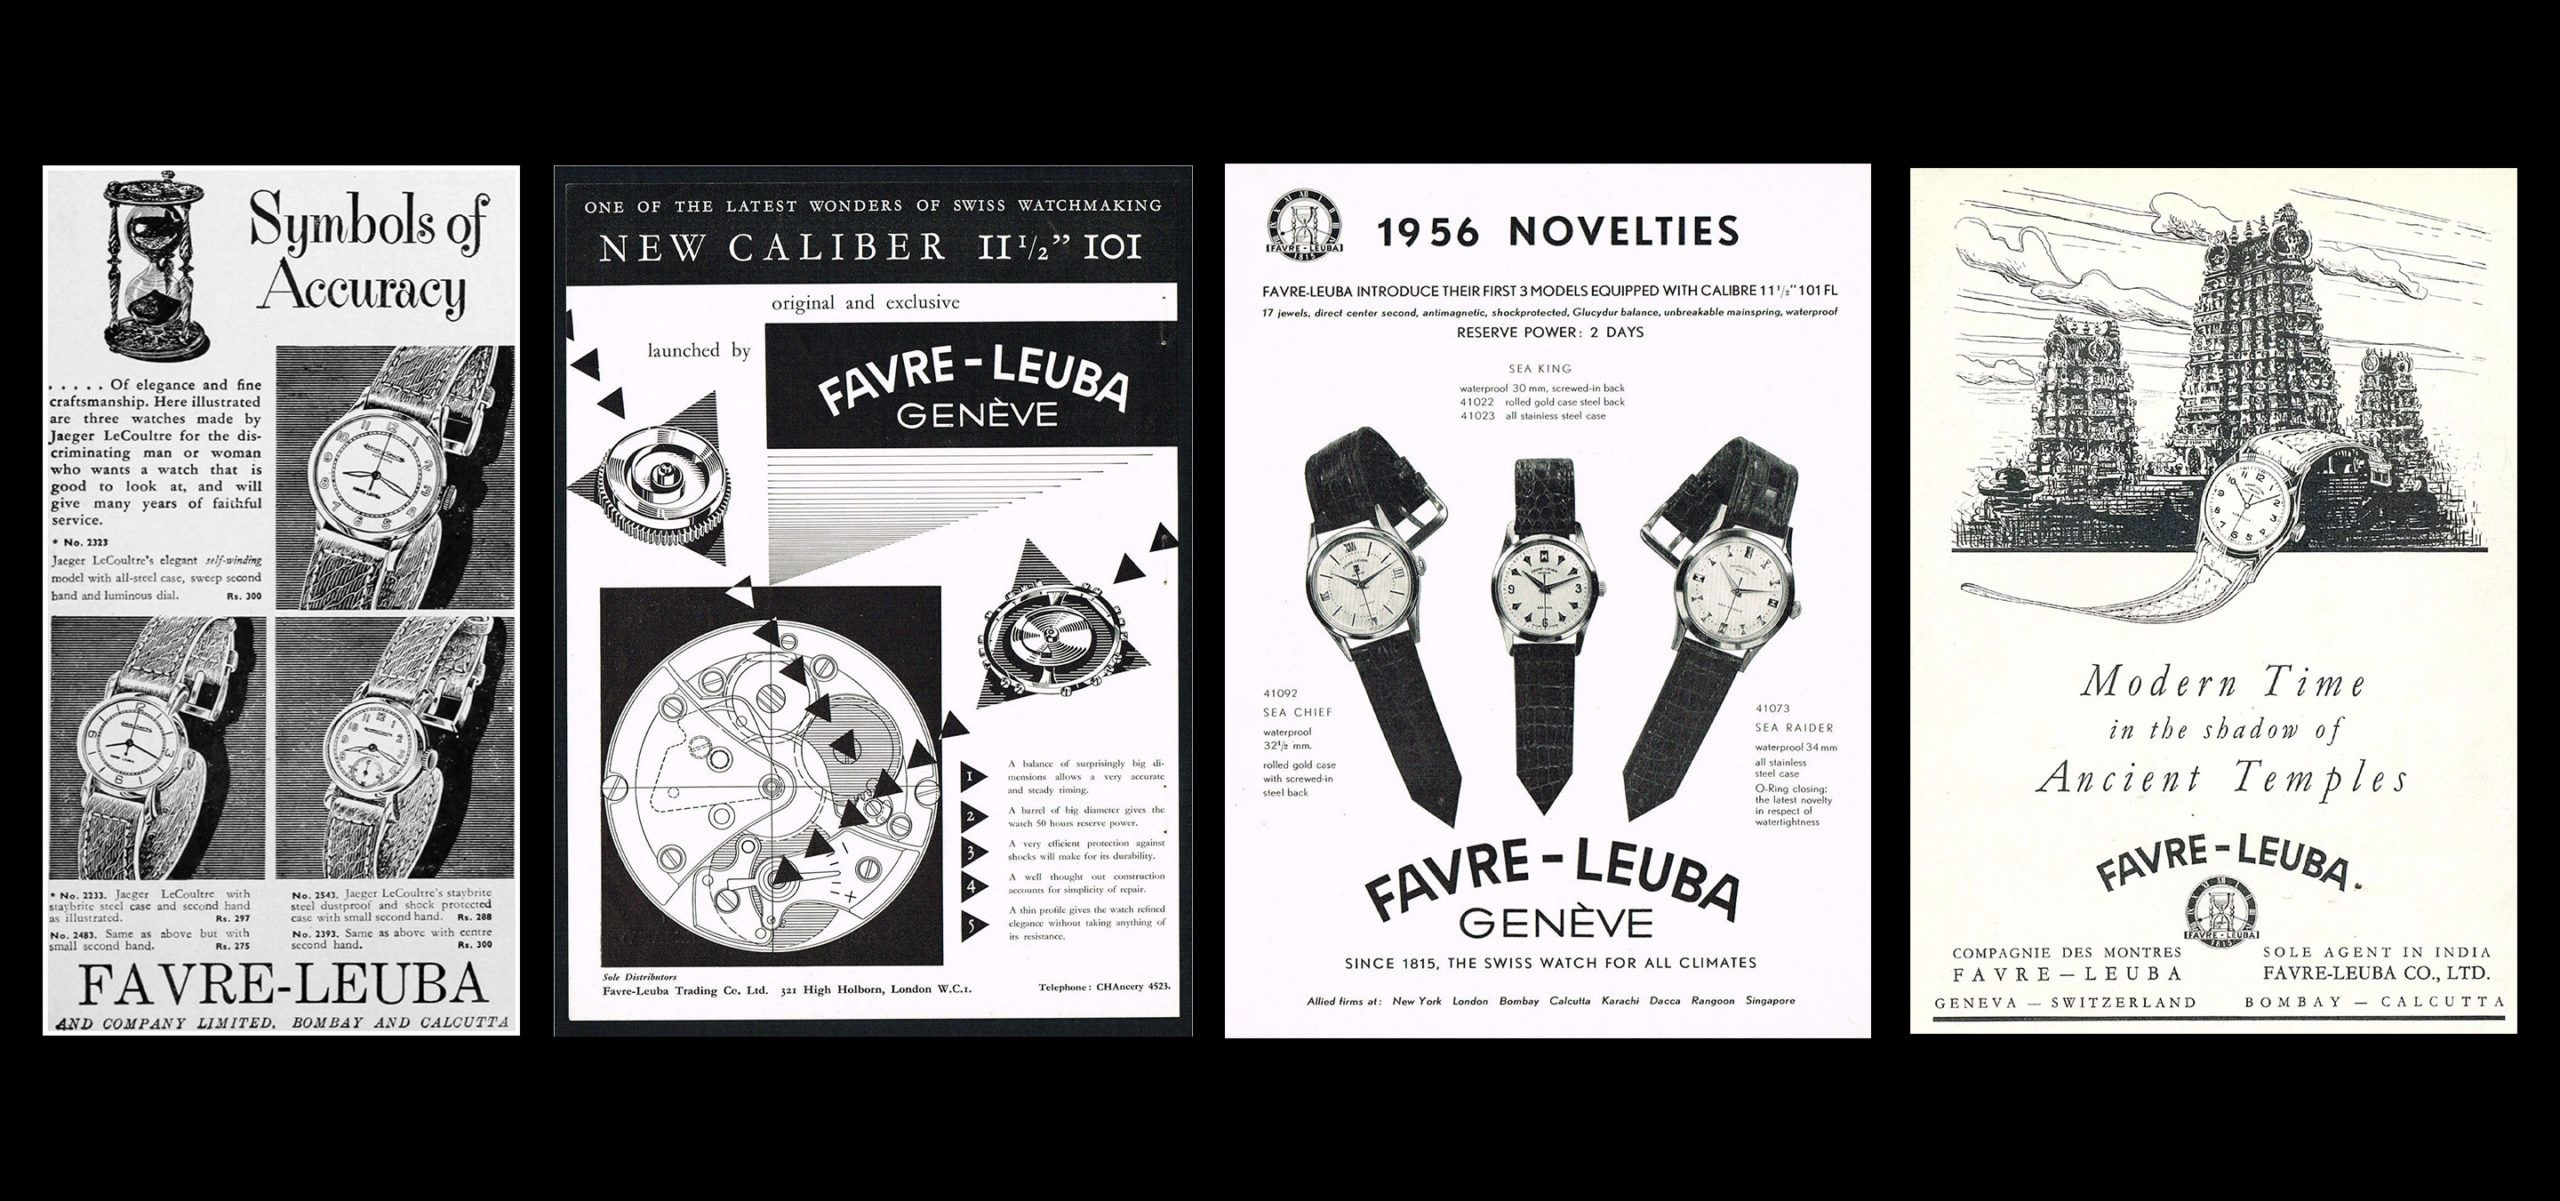 A History Of Favre Leuba: The Growth And Resilience Of The World's Second Oldest Watchmaker